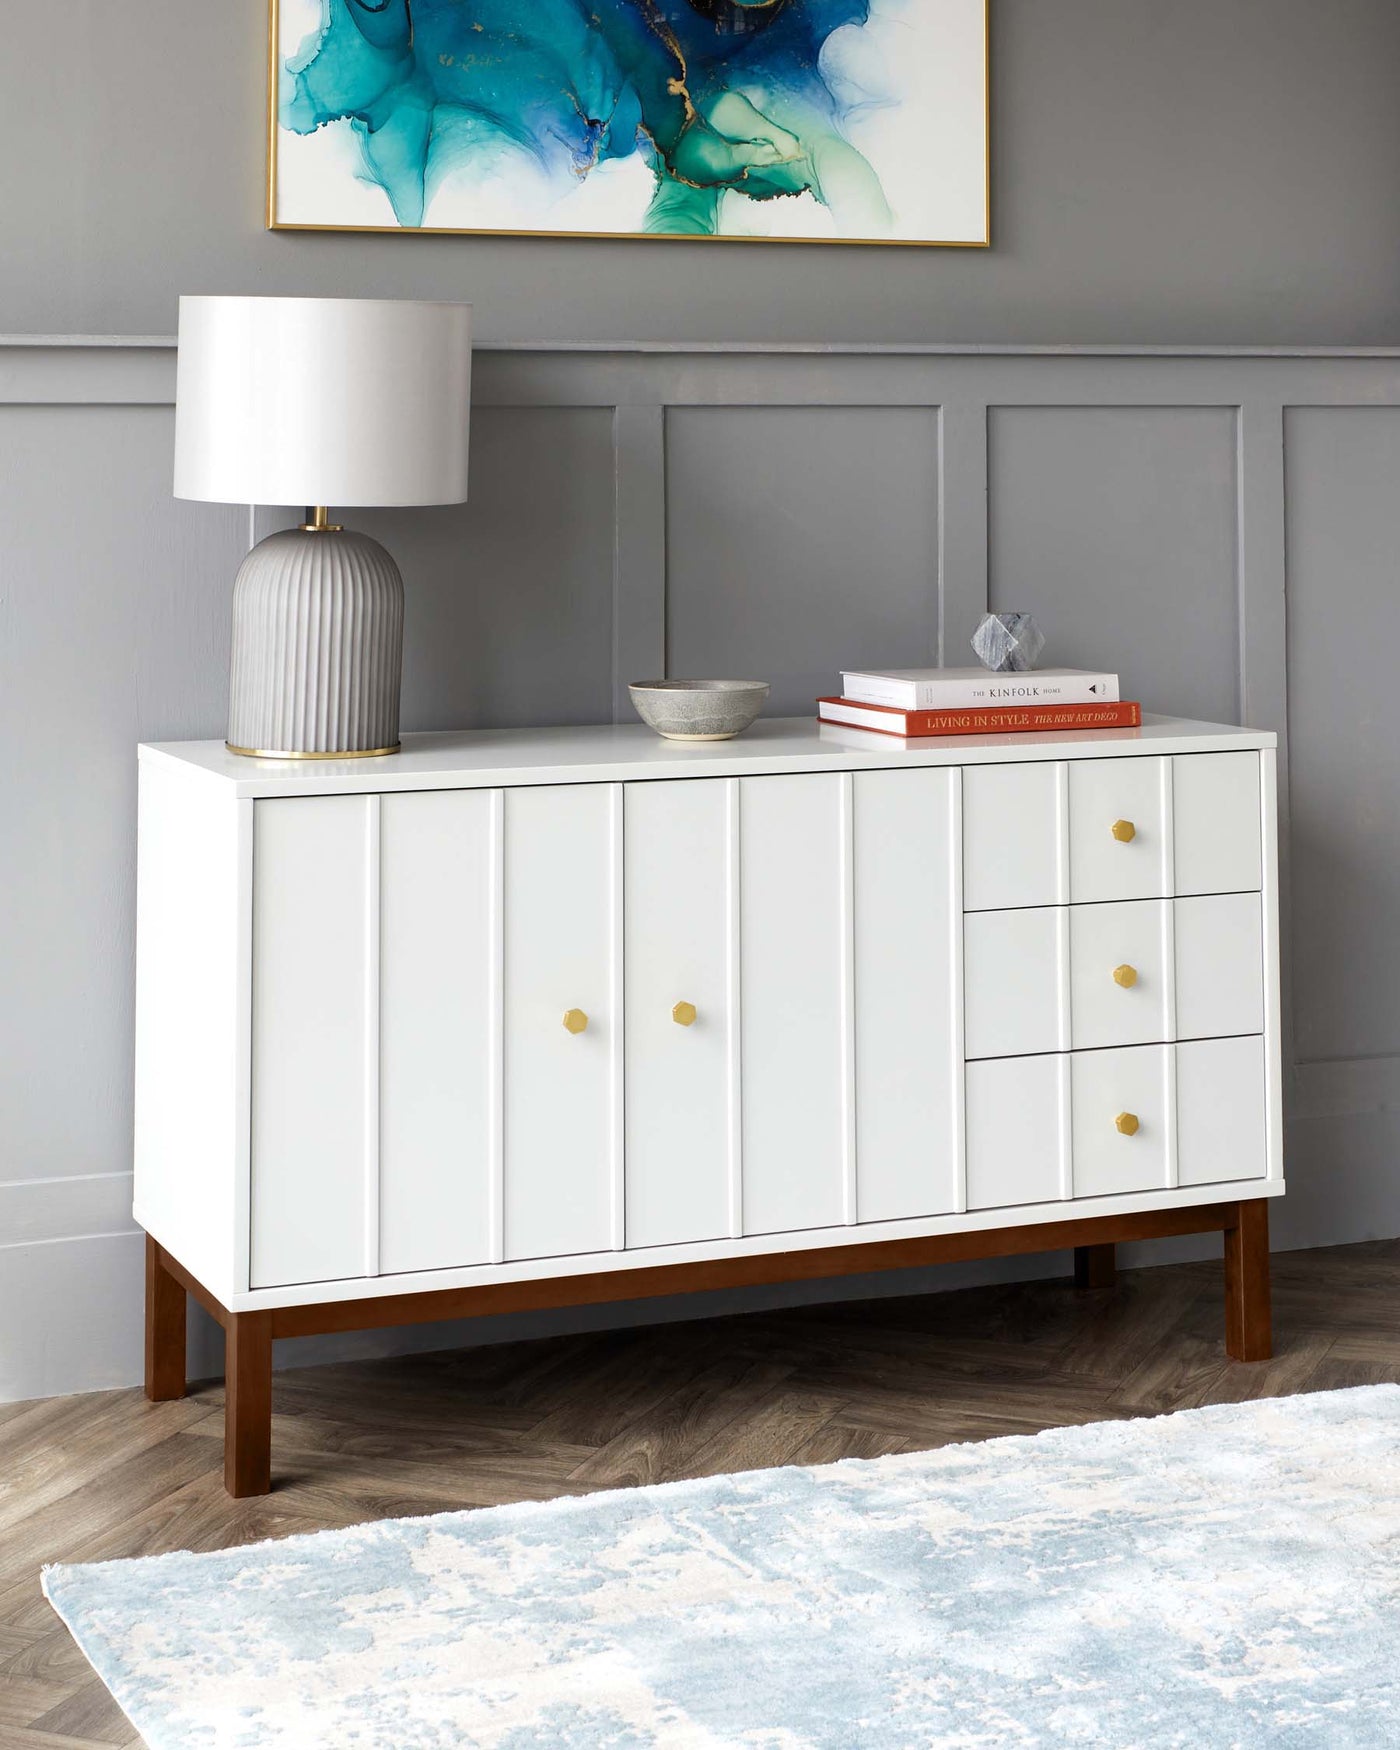 Contemporary white sideboard with golden knobs, featuring two cabinet doors and three drawers, set on tapered wooden legs. Accessorized with a grey textured lamp, a decorative silver bowl, and a stack of books atop it. The sideboard is against a wall with a modern abstract painting in blue tones, above a pale blue and white patterned area rug on a wooden floor.